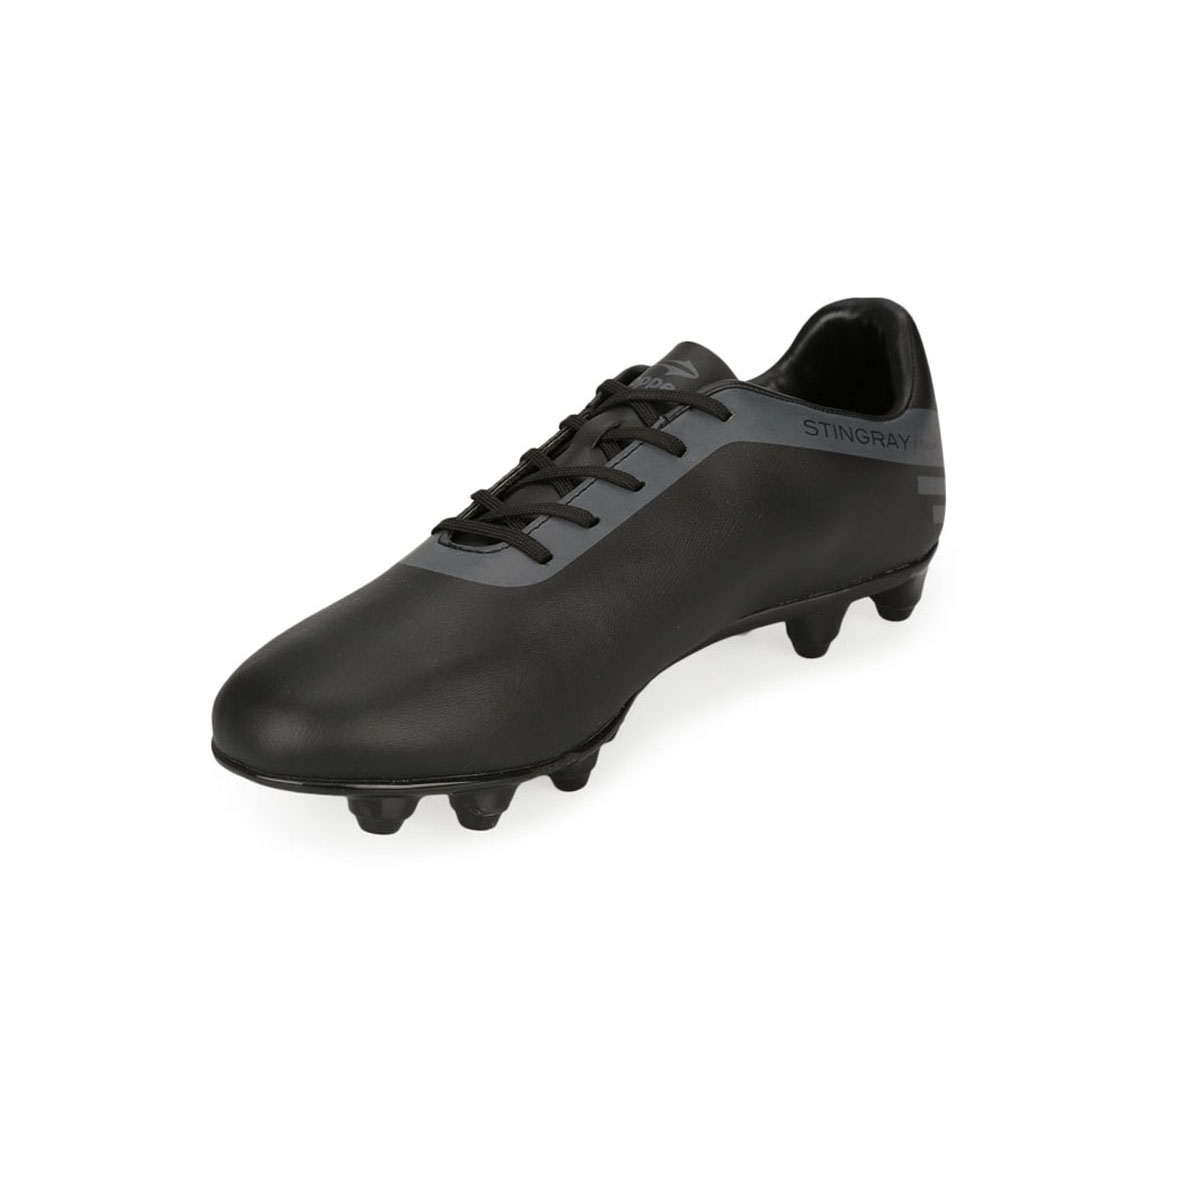 Botines Topper Stingray Mach 1 FG,  image number null